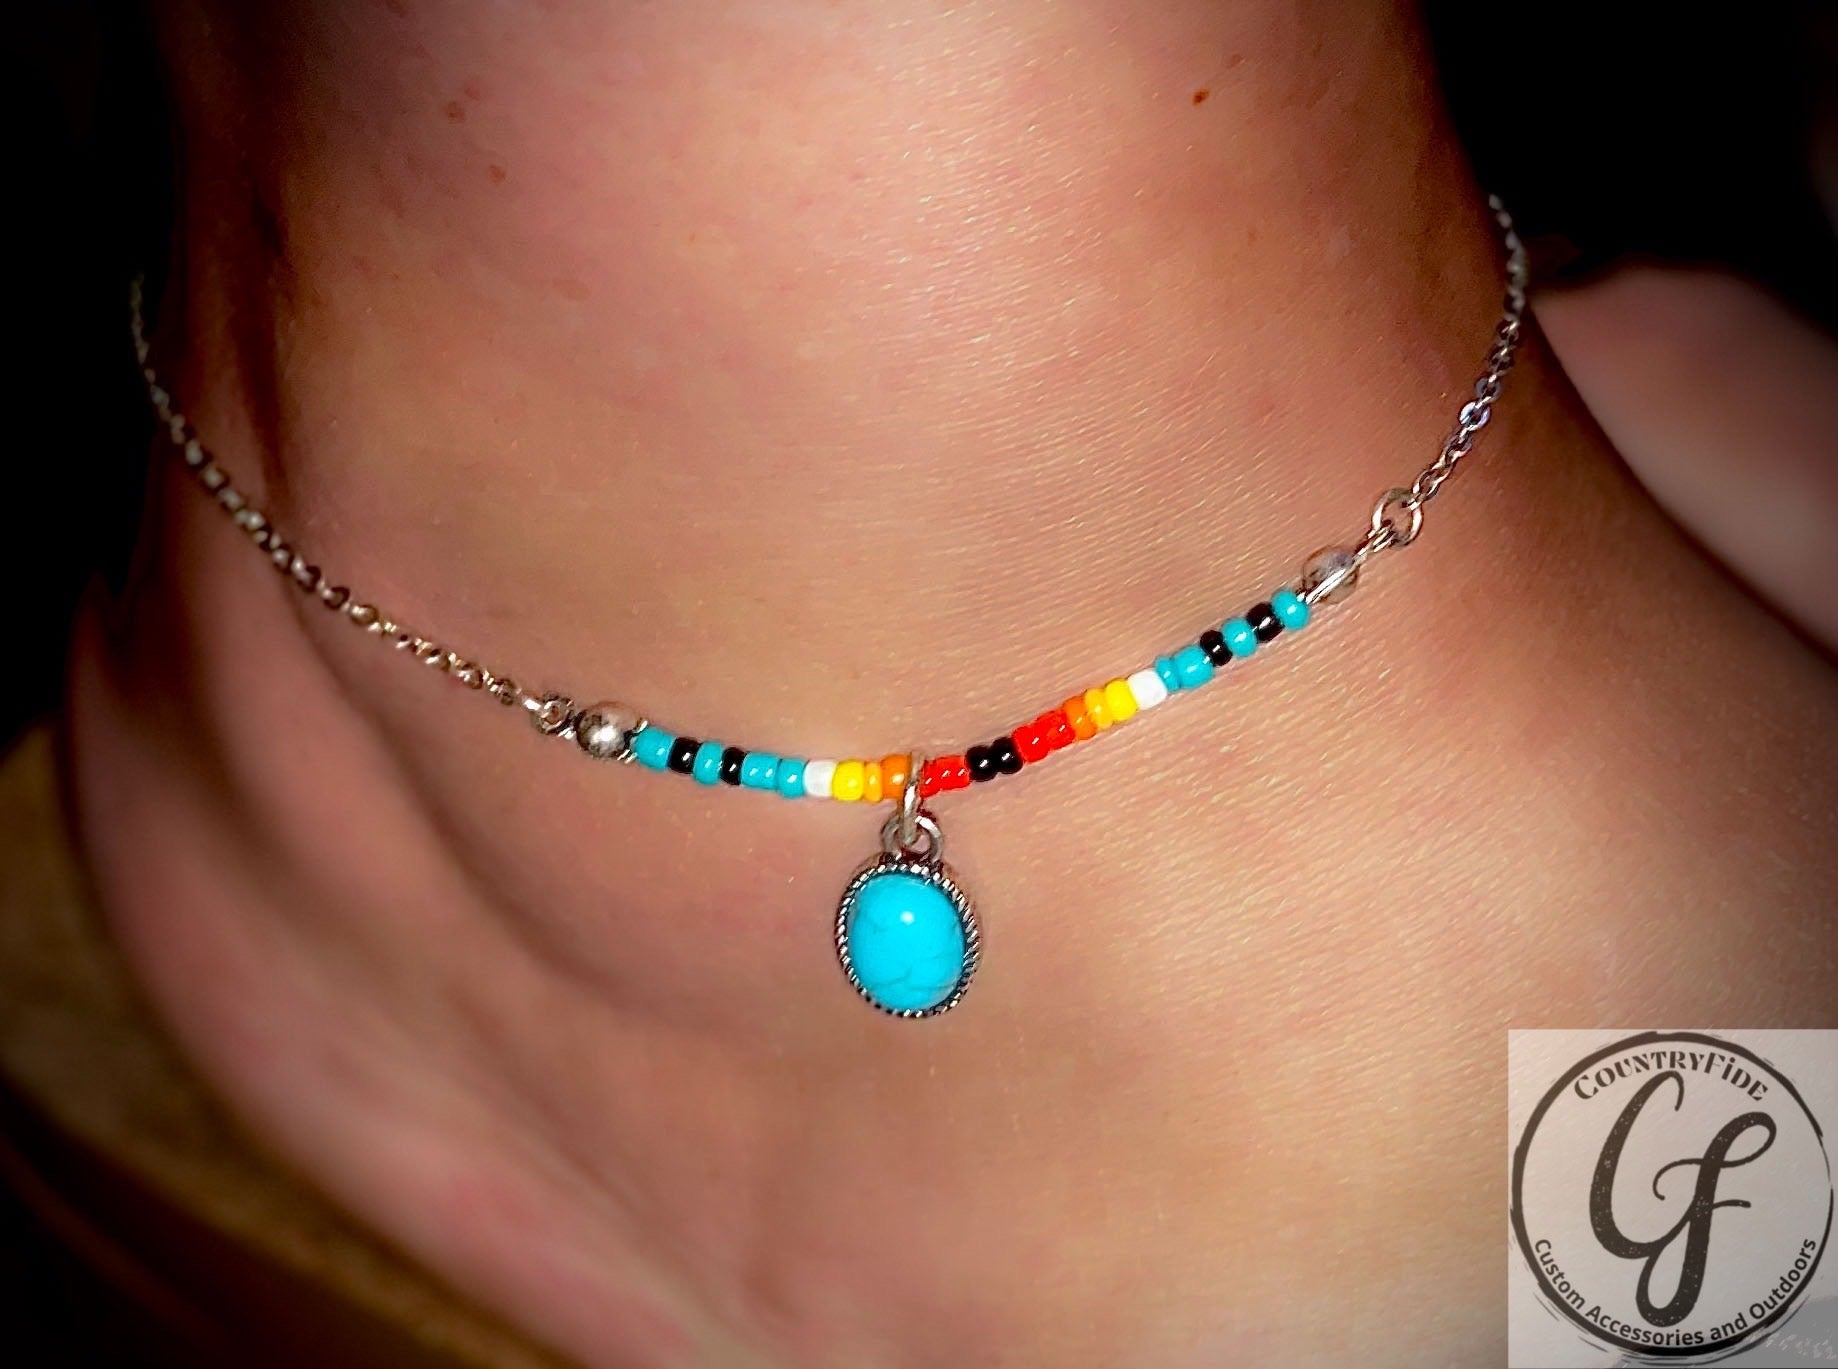 The Ruidoso Beaded Anklet - CountryFide Custom Accessories and Outdoors